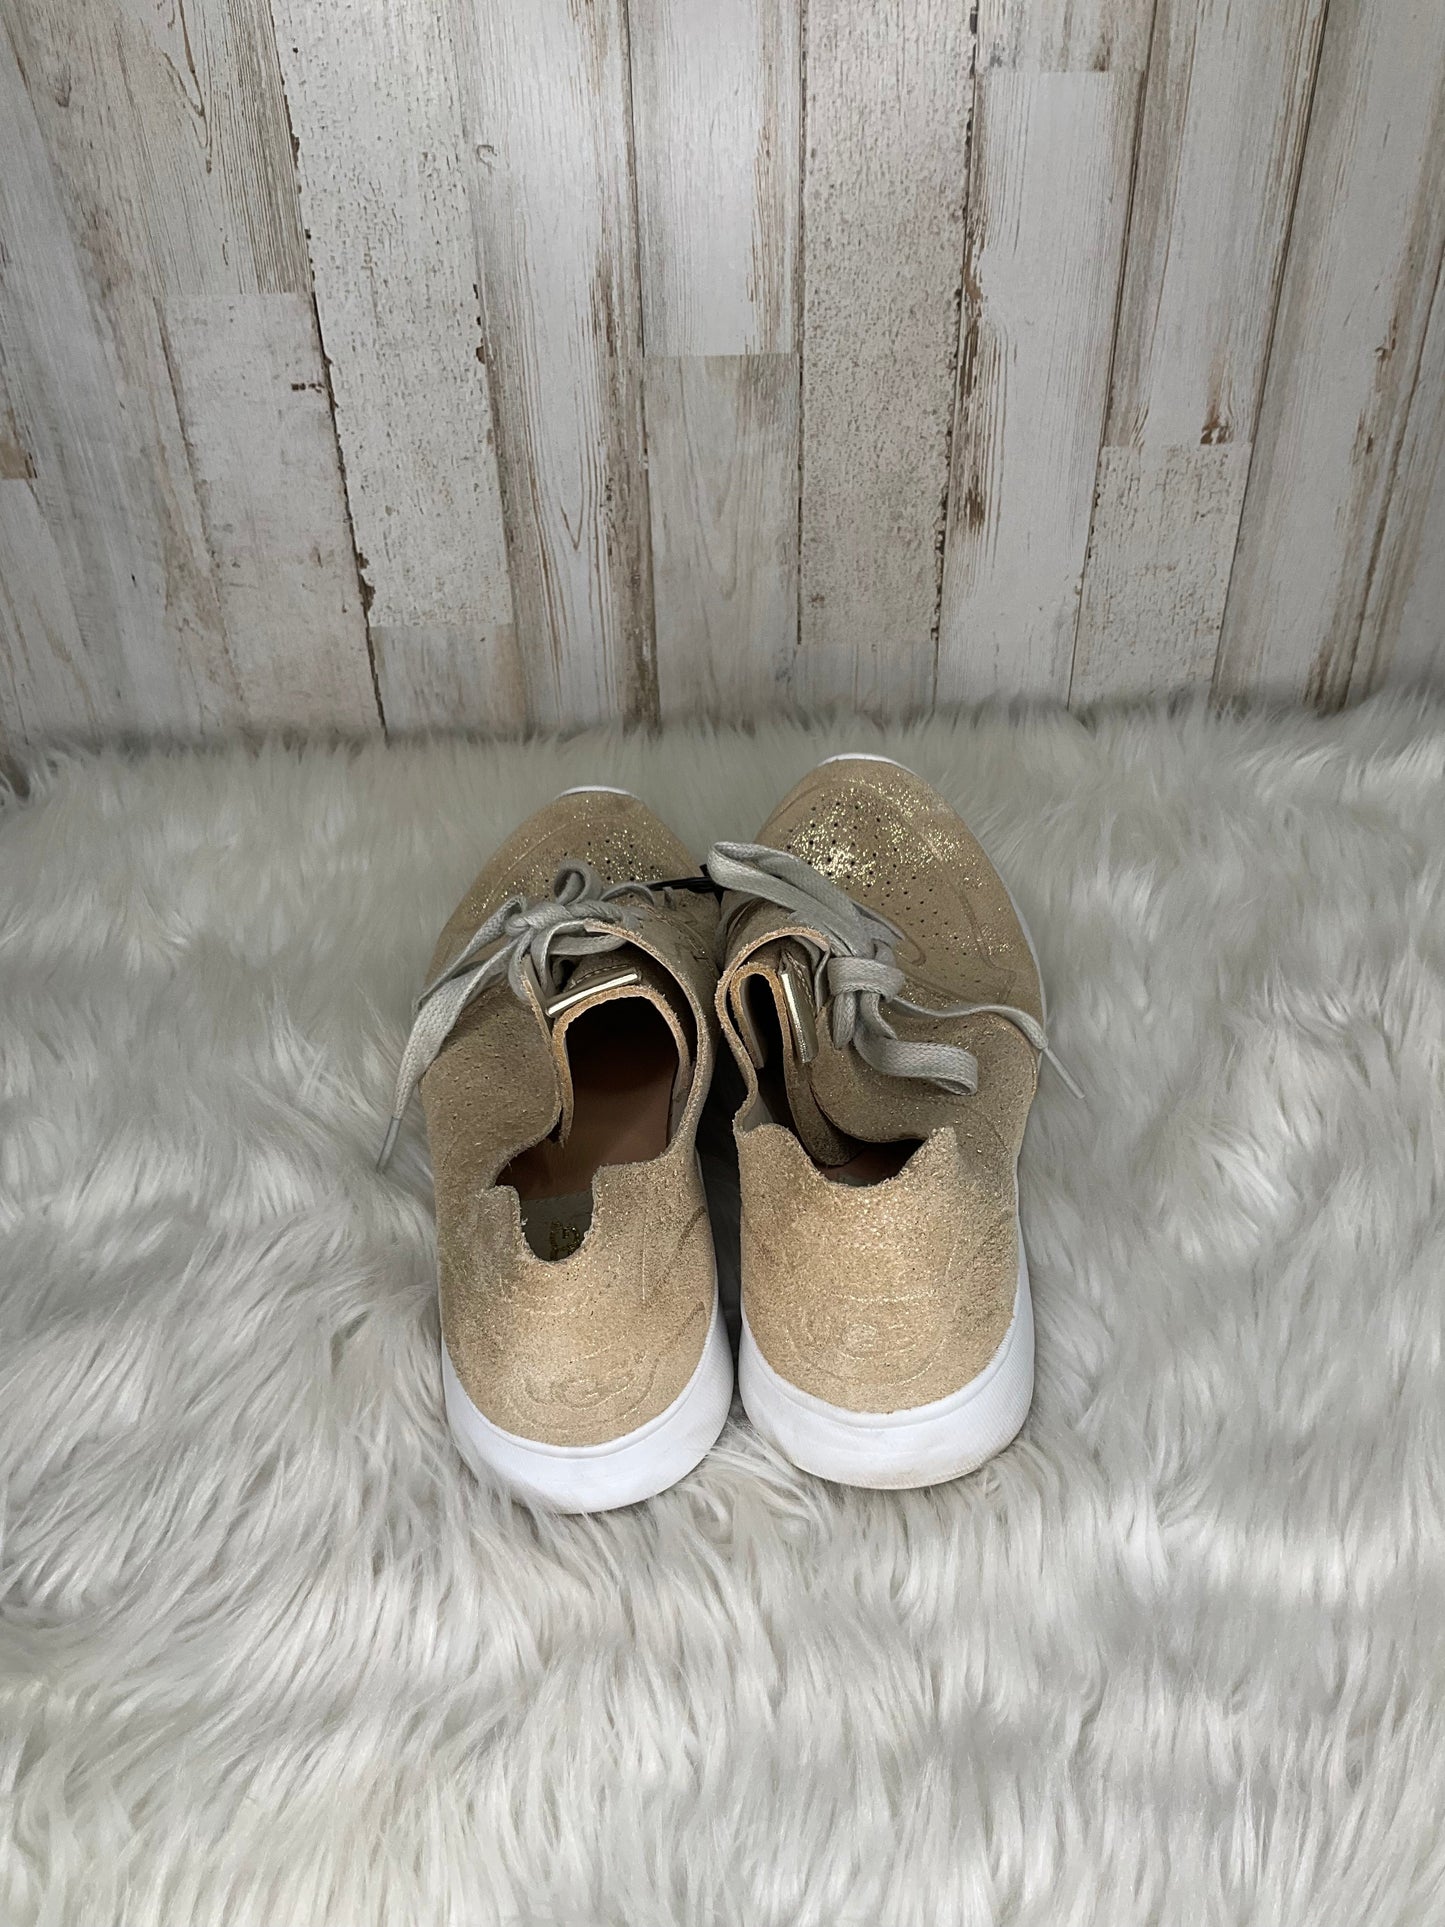 Gold Shoes Athletic Ugg, Size 8